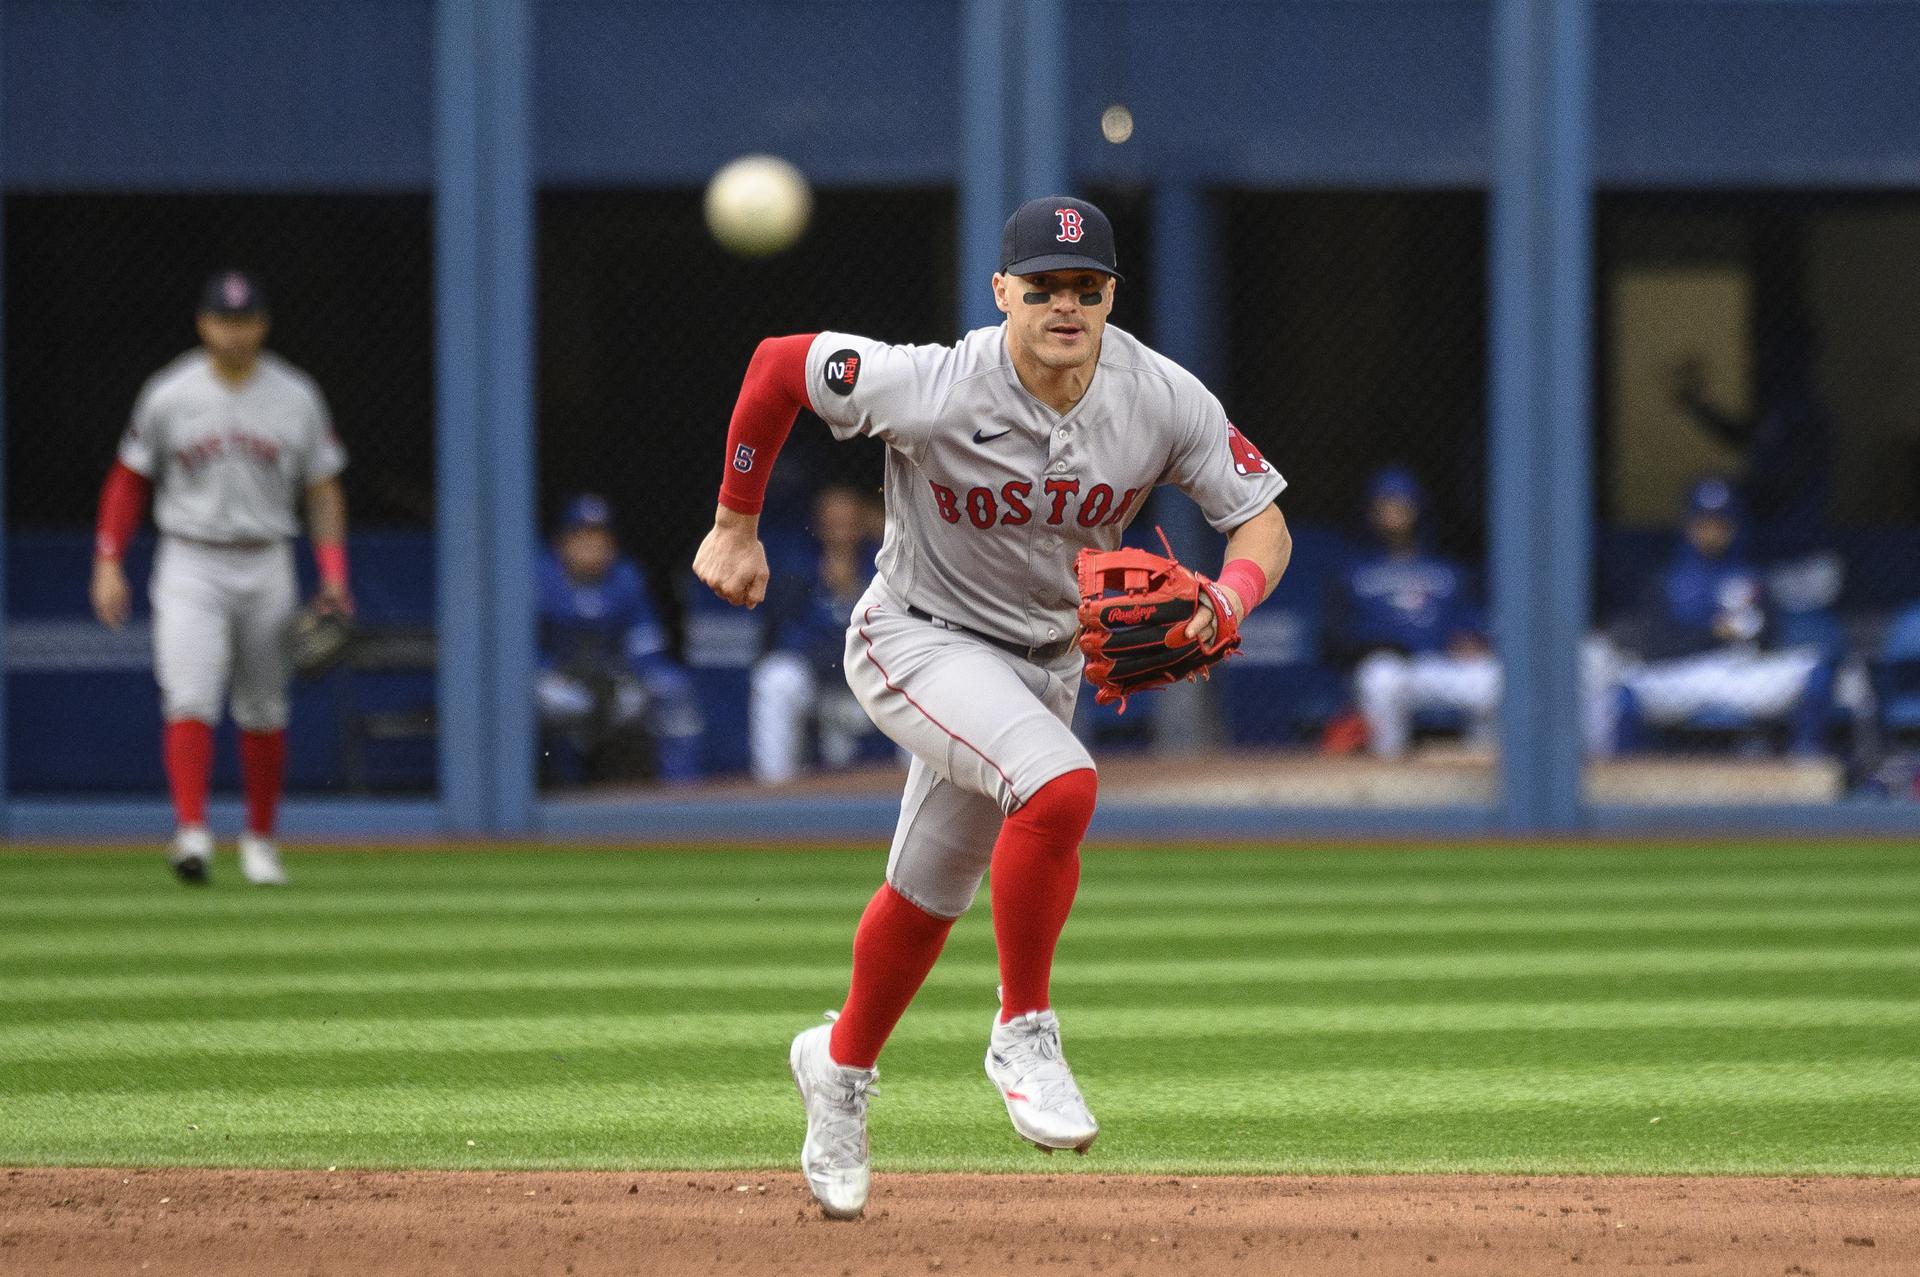 Red Sox player Kiké Hernández lunges toward a ball coming at him at second base